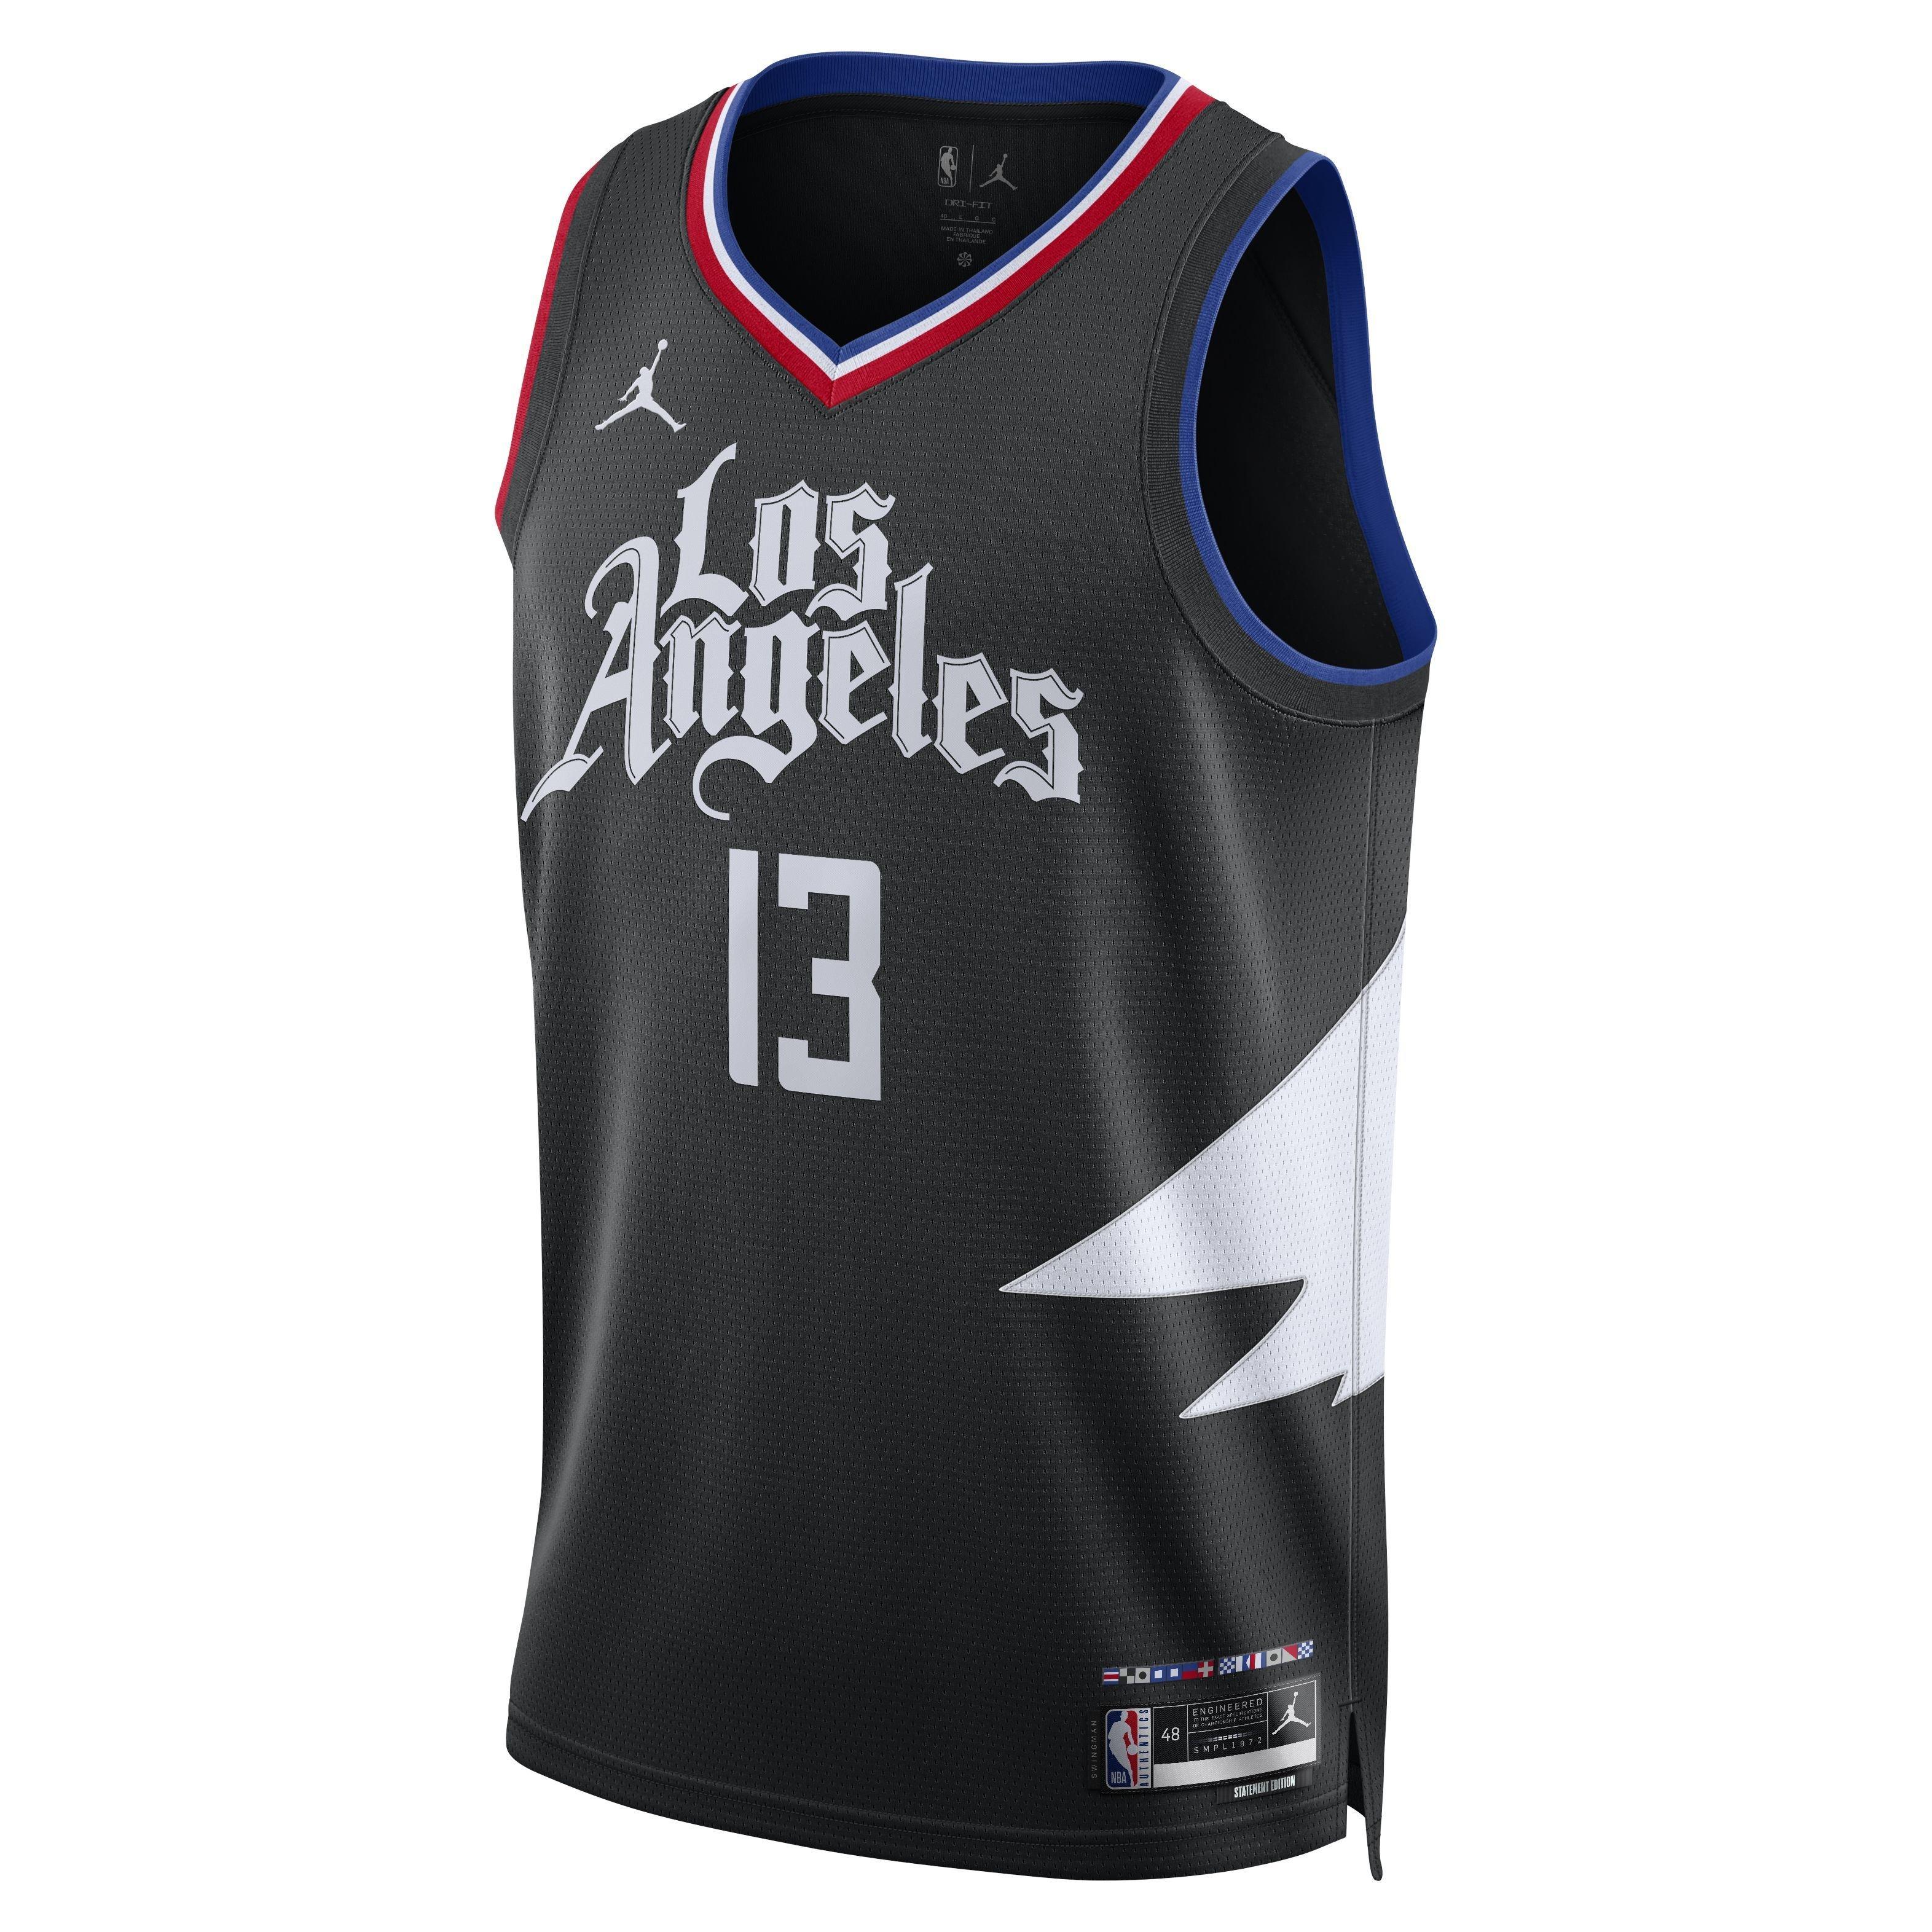 clippers classic edition jersey